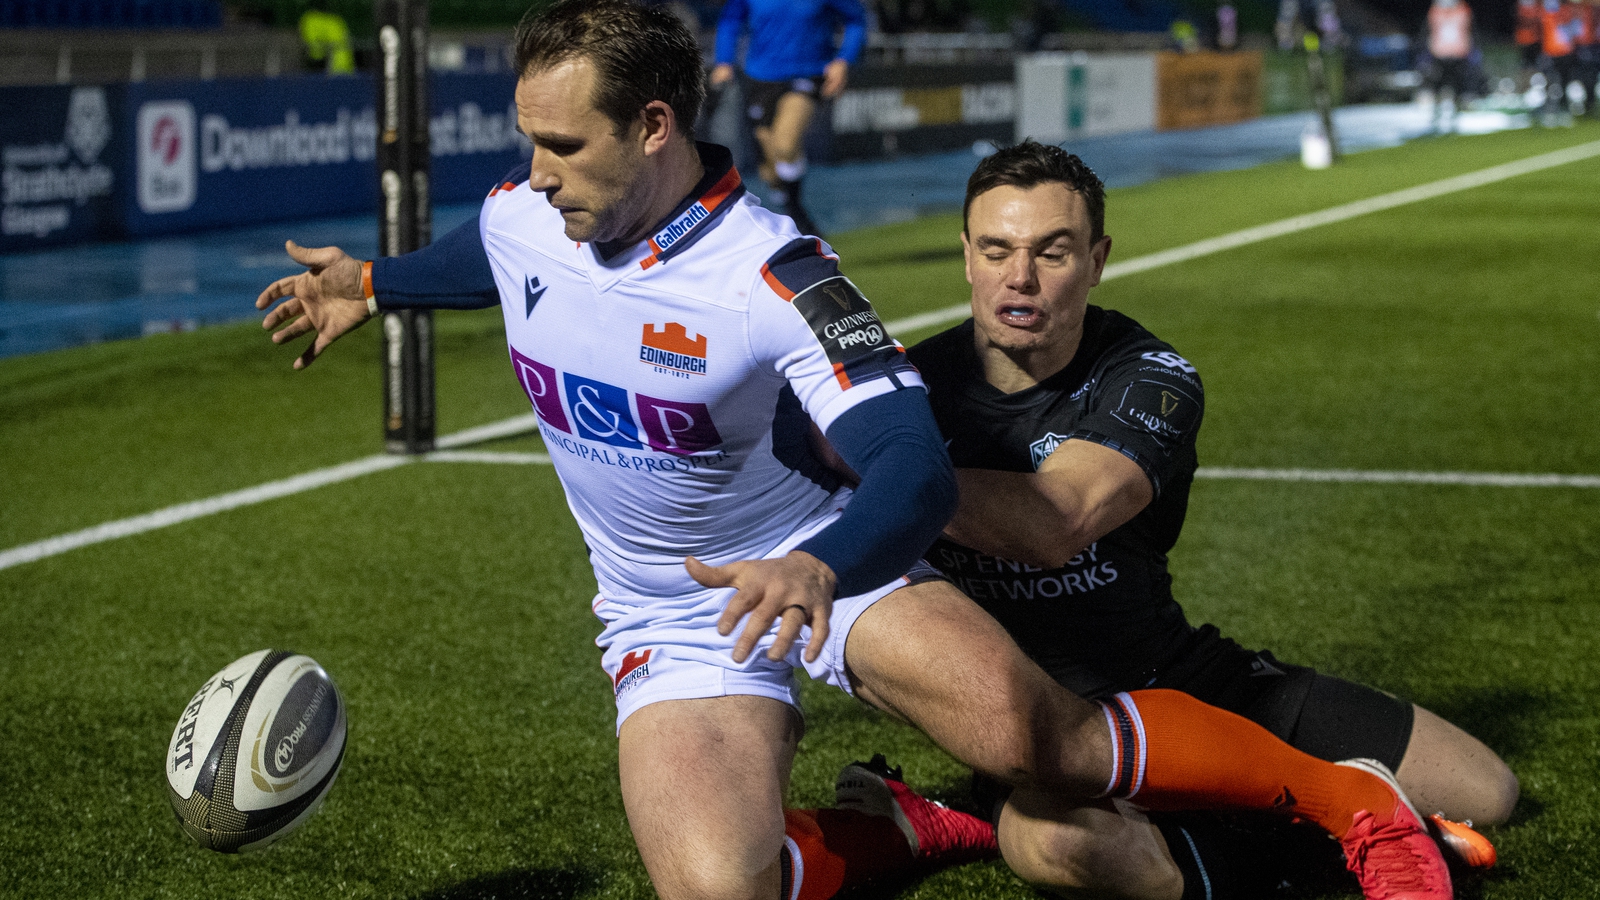 Passing train horn gets Glasgow on track in Pro14 derby